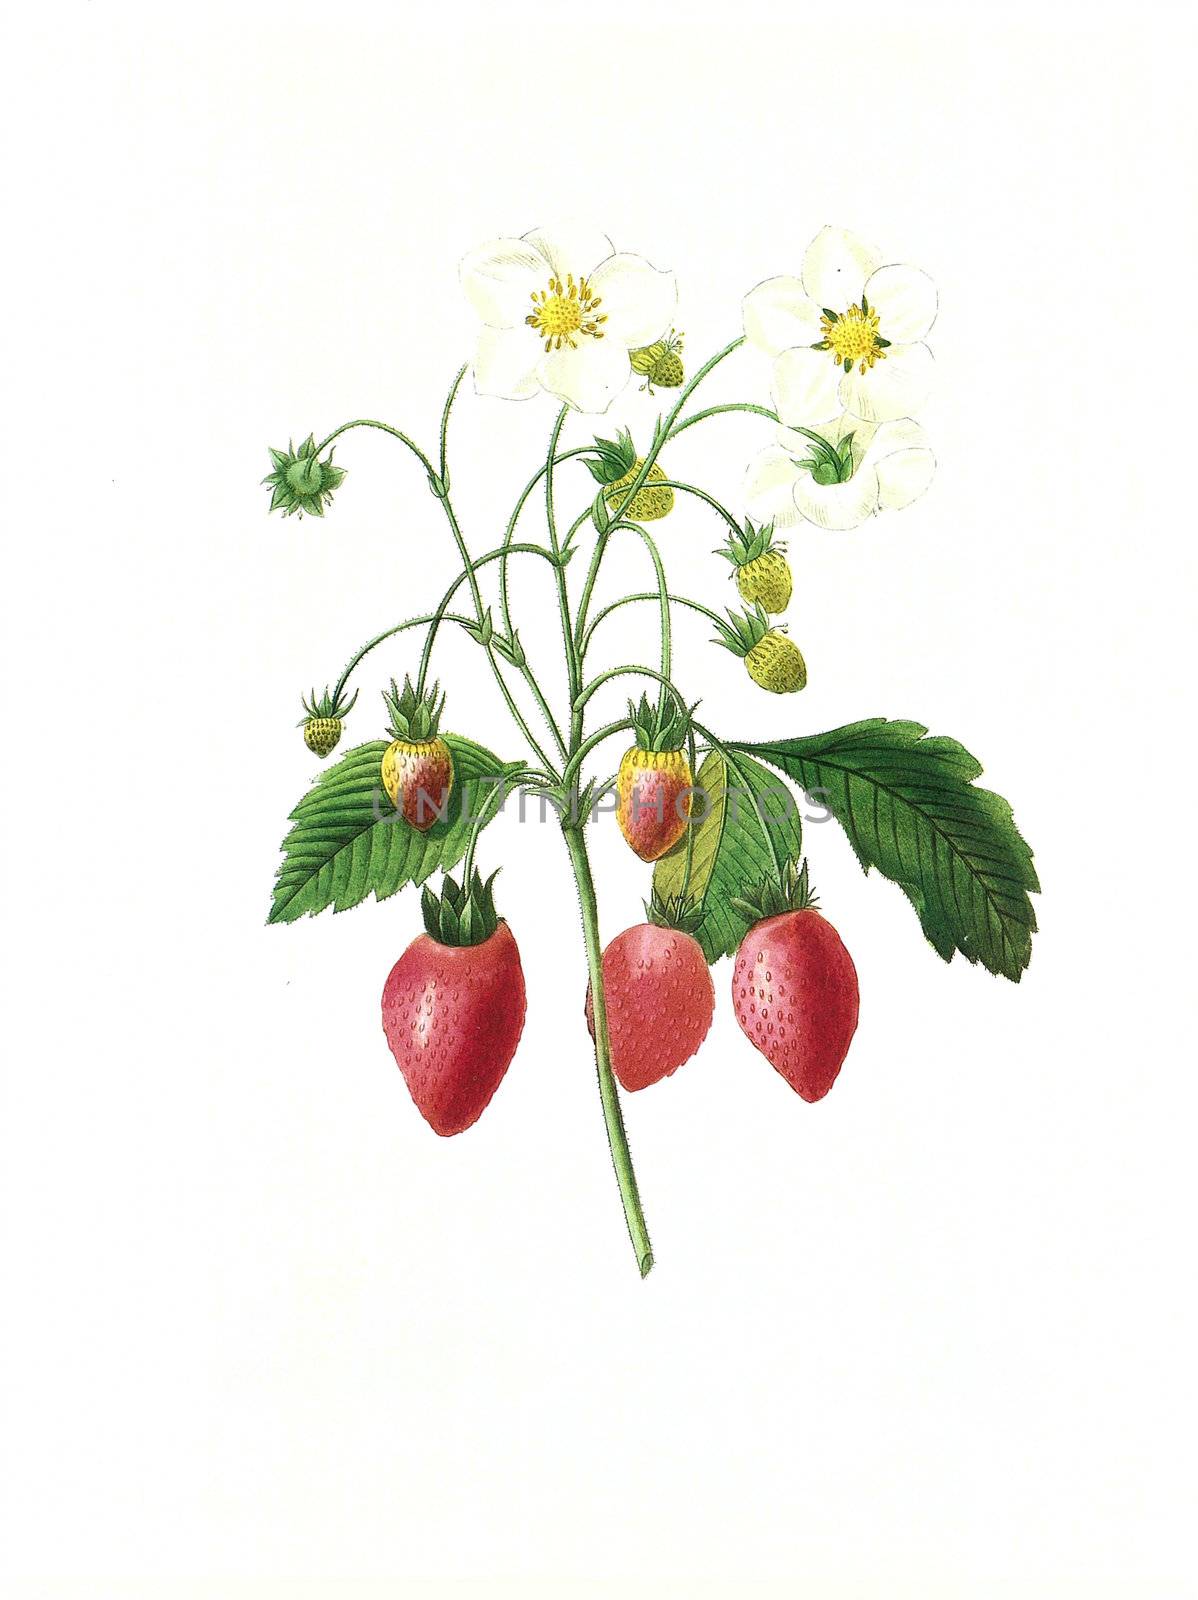 Antique illustration of a fraisier engraved by Pierre-Joseph Redoute (1759 - 1840), nicknamed "The Raphael of flowers".